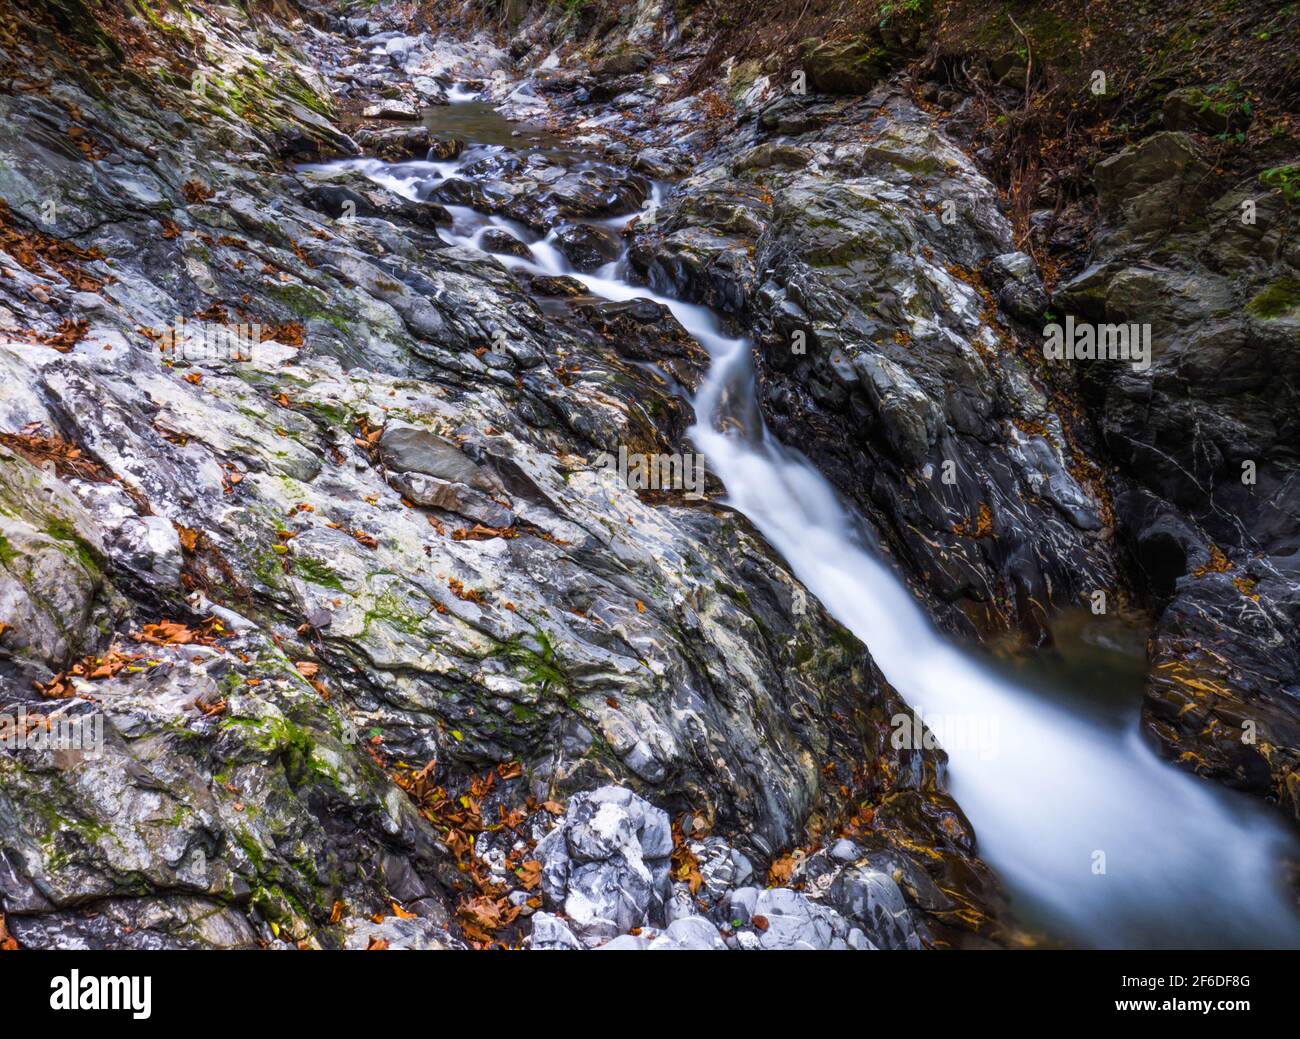 A wide angle shot of a small waterfall in the Carpathian mountains Vrancea county Romania Stock Photo